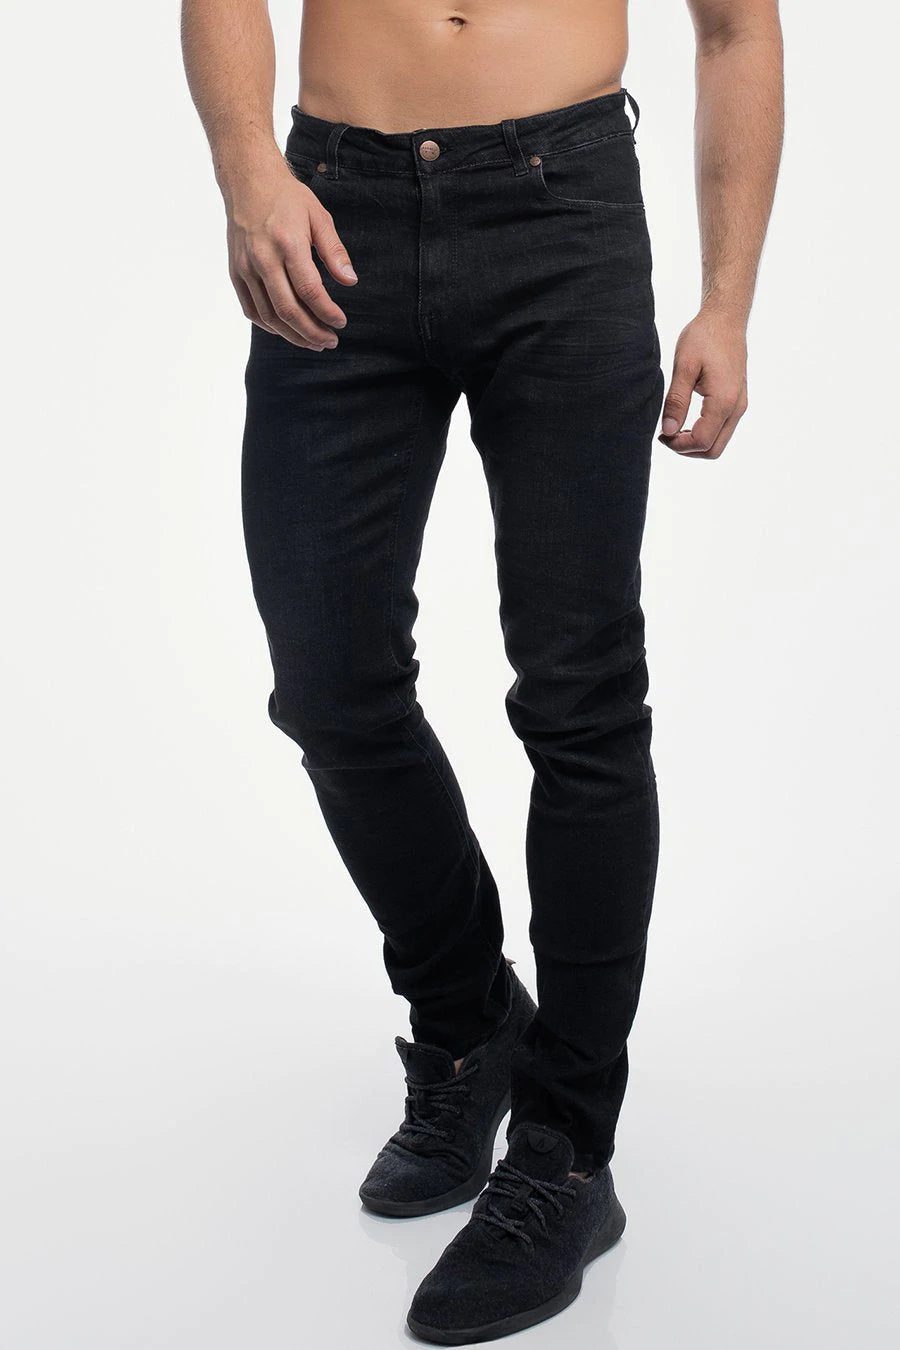 Straight Athletic Fit Jeans | Barbell Apparel | Reviews on Judge.me